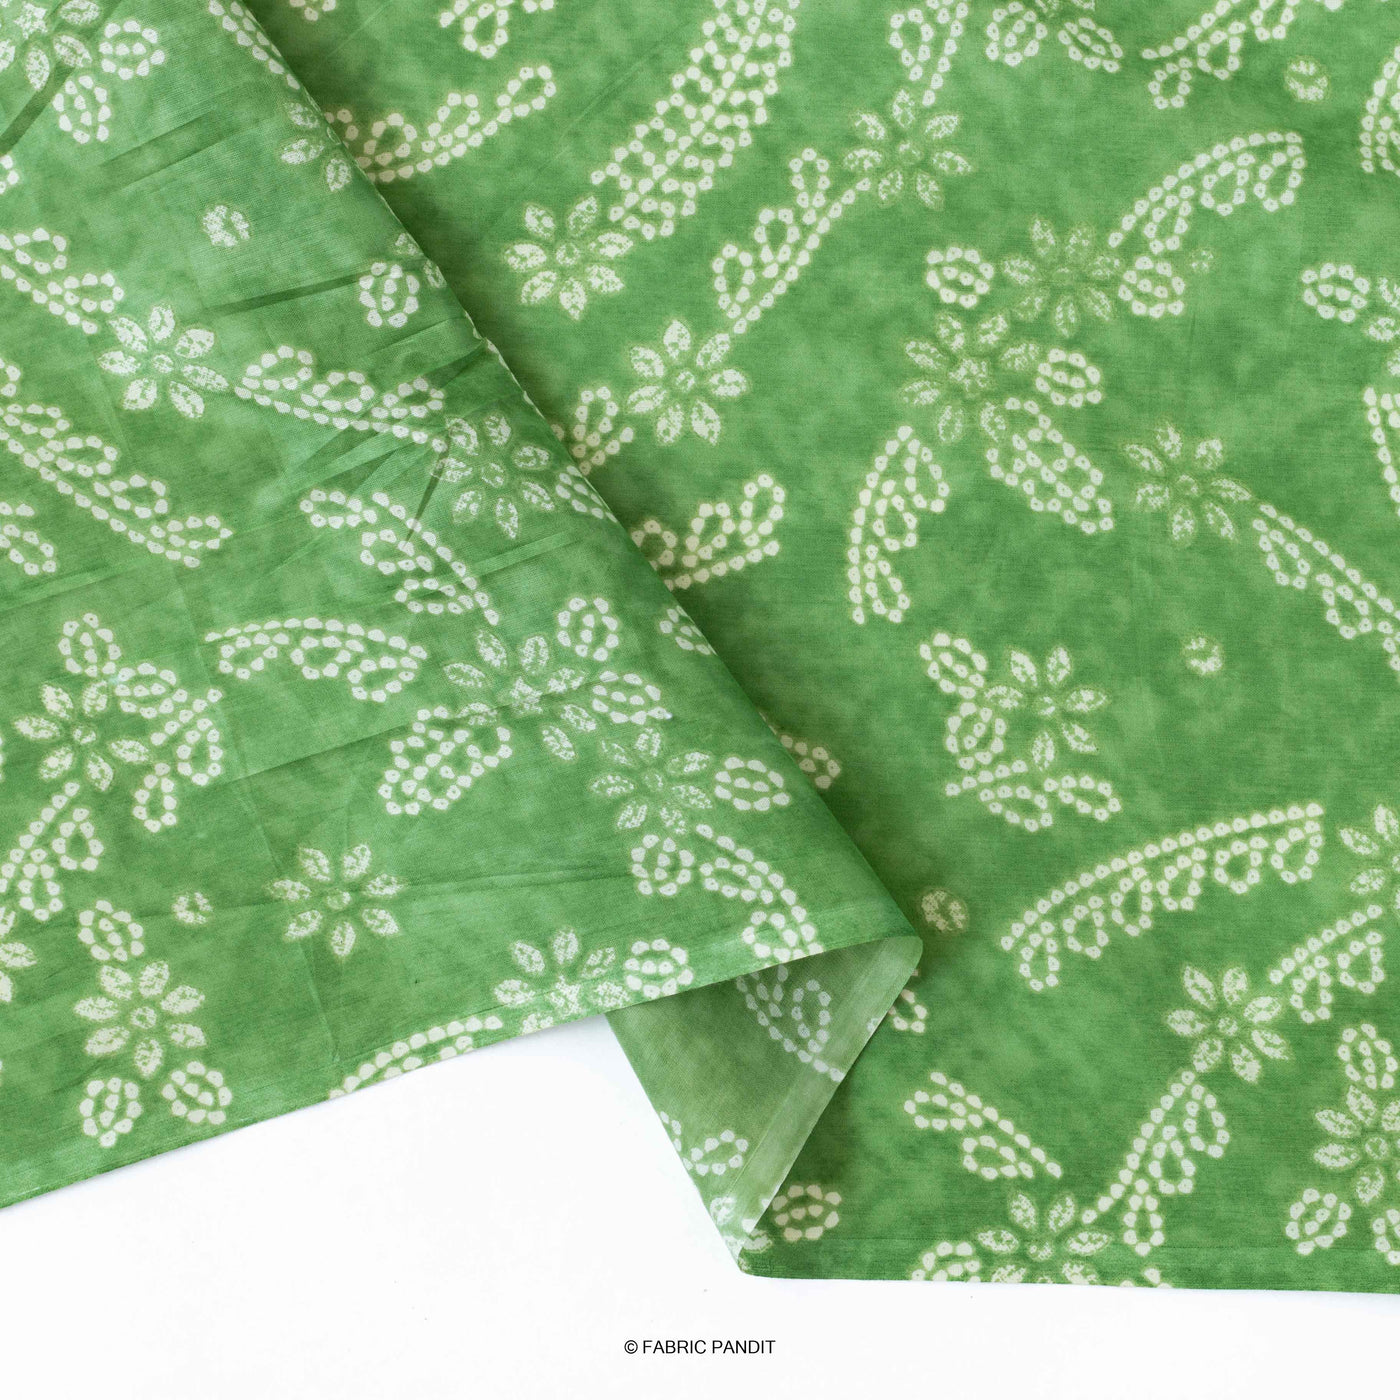 Fabric Pandit Fabric Green and White Pure Batik Natural Dyed Floral Pattern Pure Cotton Voile Fabric (Width 42 Inches)